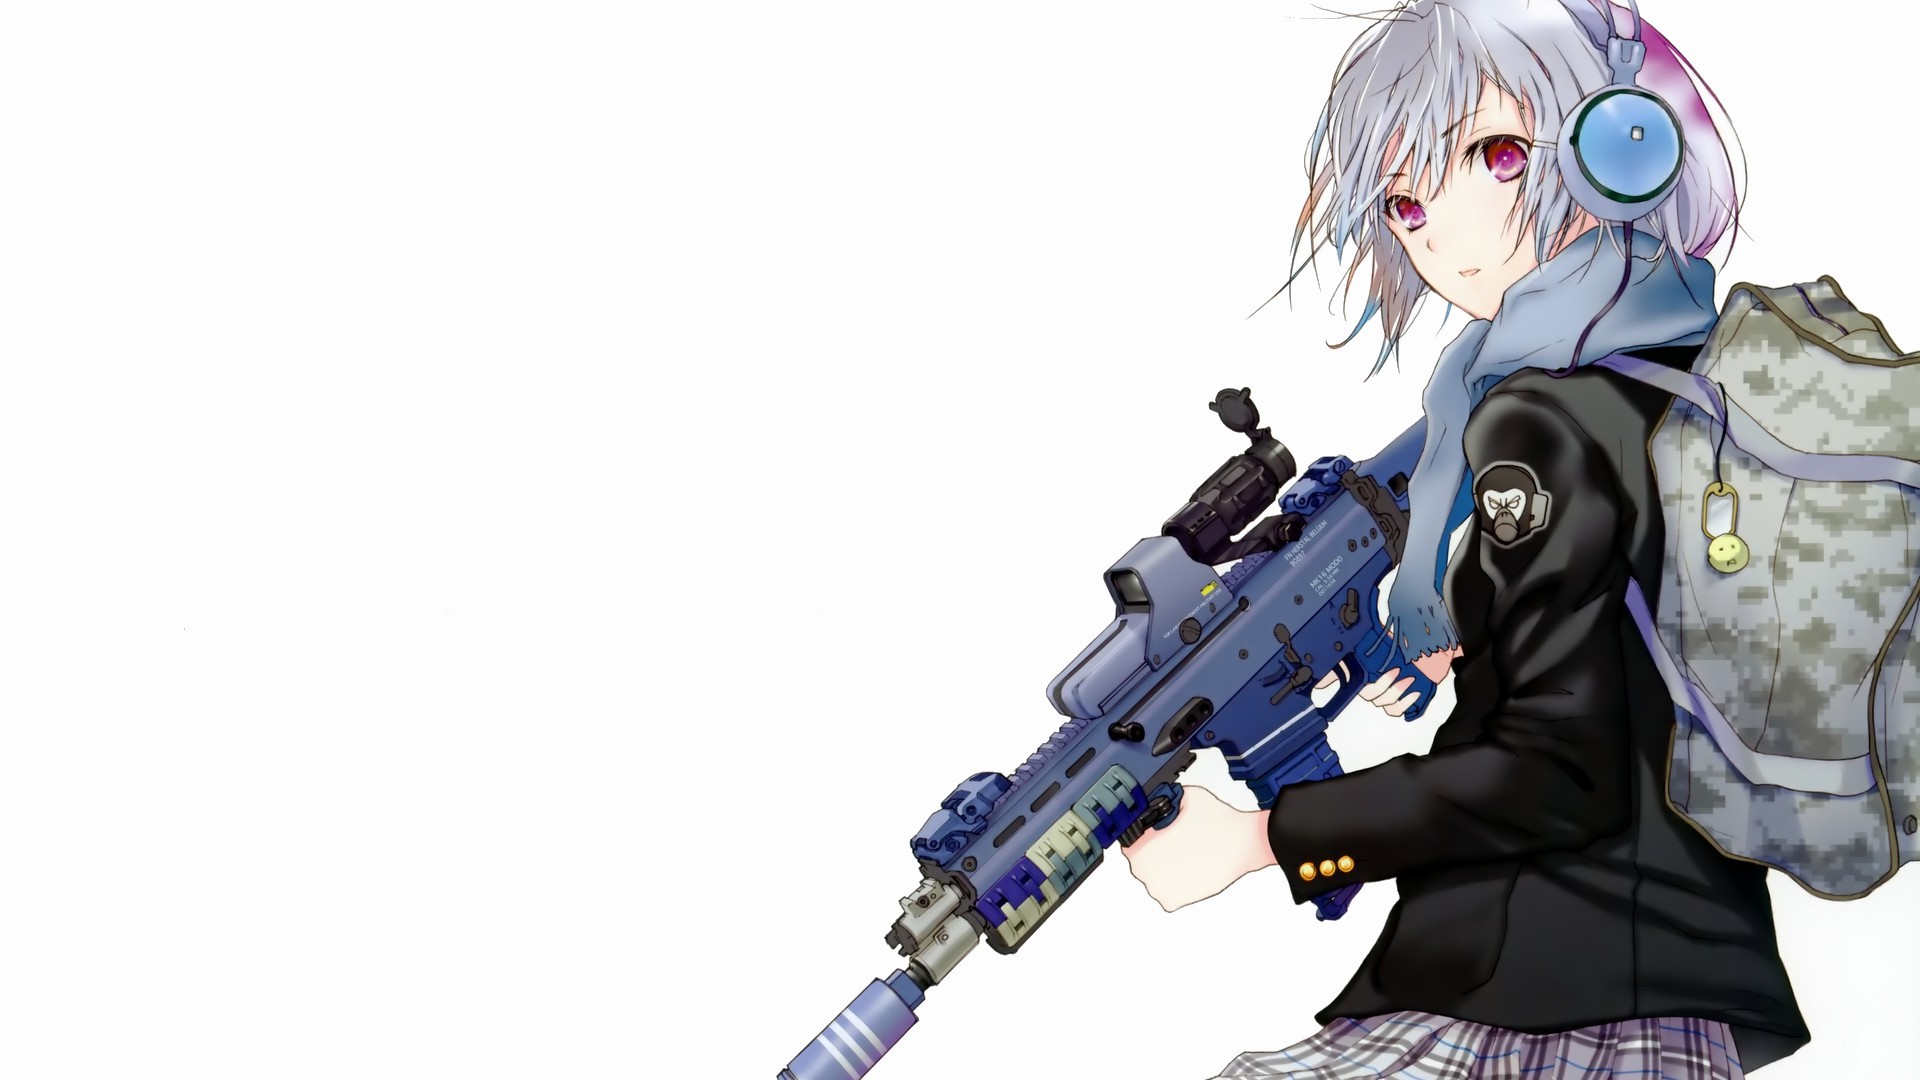 anime, Military, Headphones, Backpacks, School Uniform, White Hair, Scopes, Scarf, Simple Background, White Background, Weapon, Suppressors, Jacket, Purple Eyes, Red Eyes, Original Characters, Anime Girls, SCAR Wallpaper